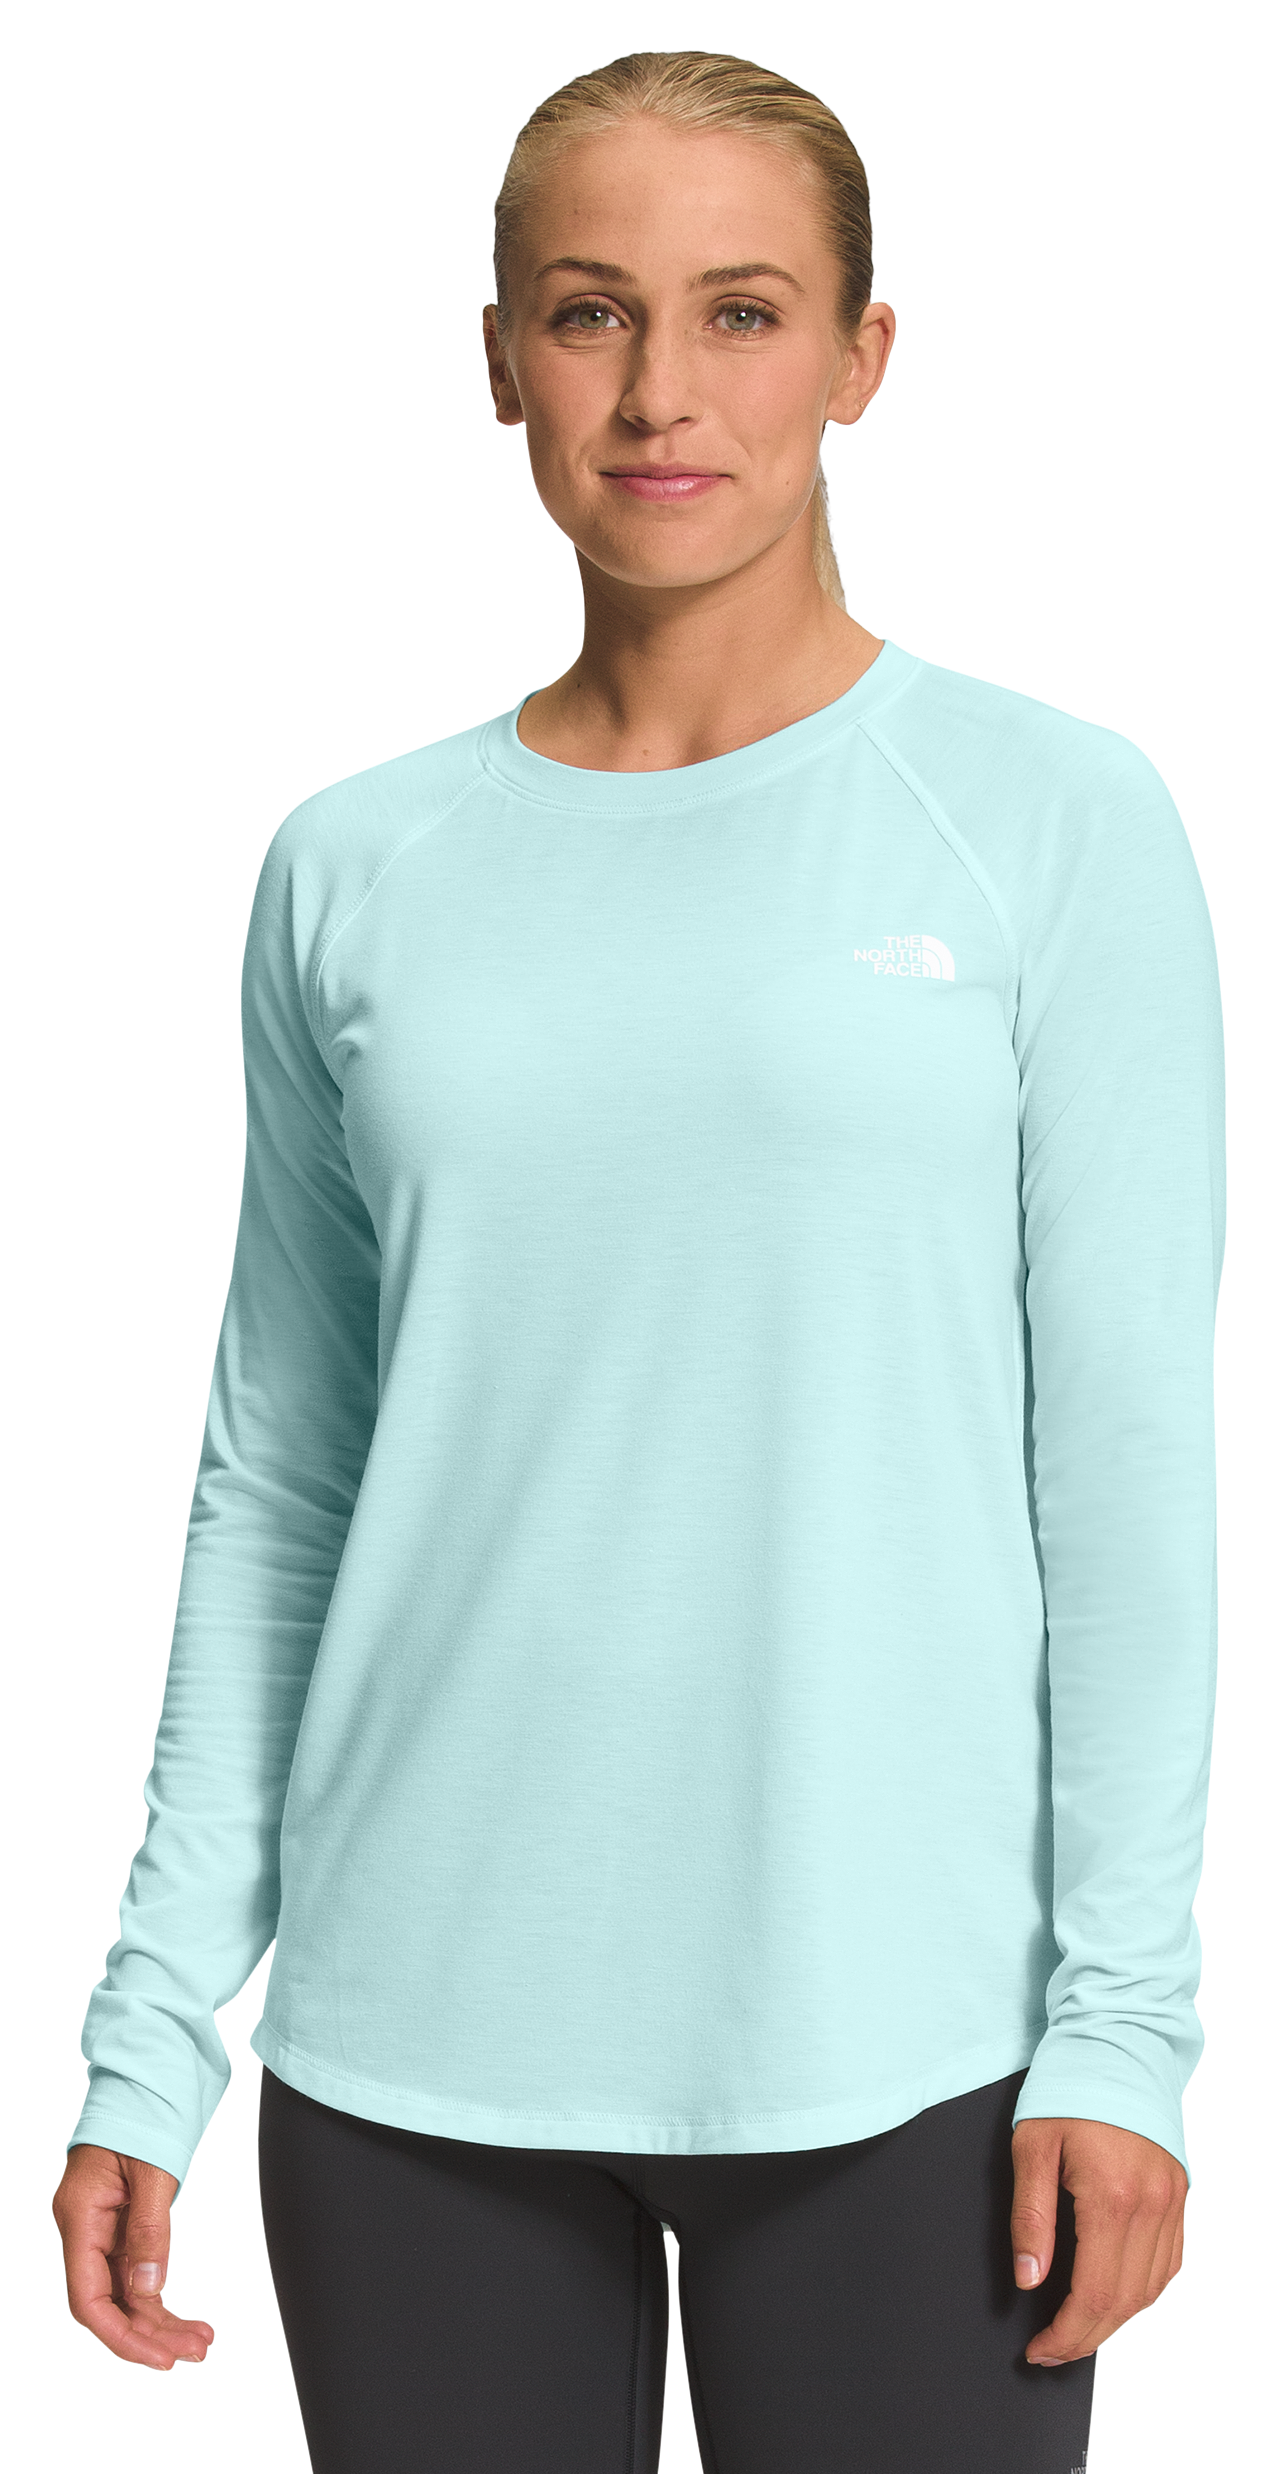 The North Face Wander Hi-Low Long-Sleeve Shirt for Ladies - Skylight Blue Heather - L